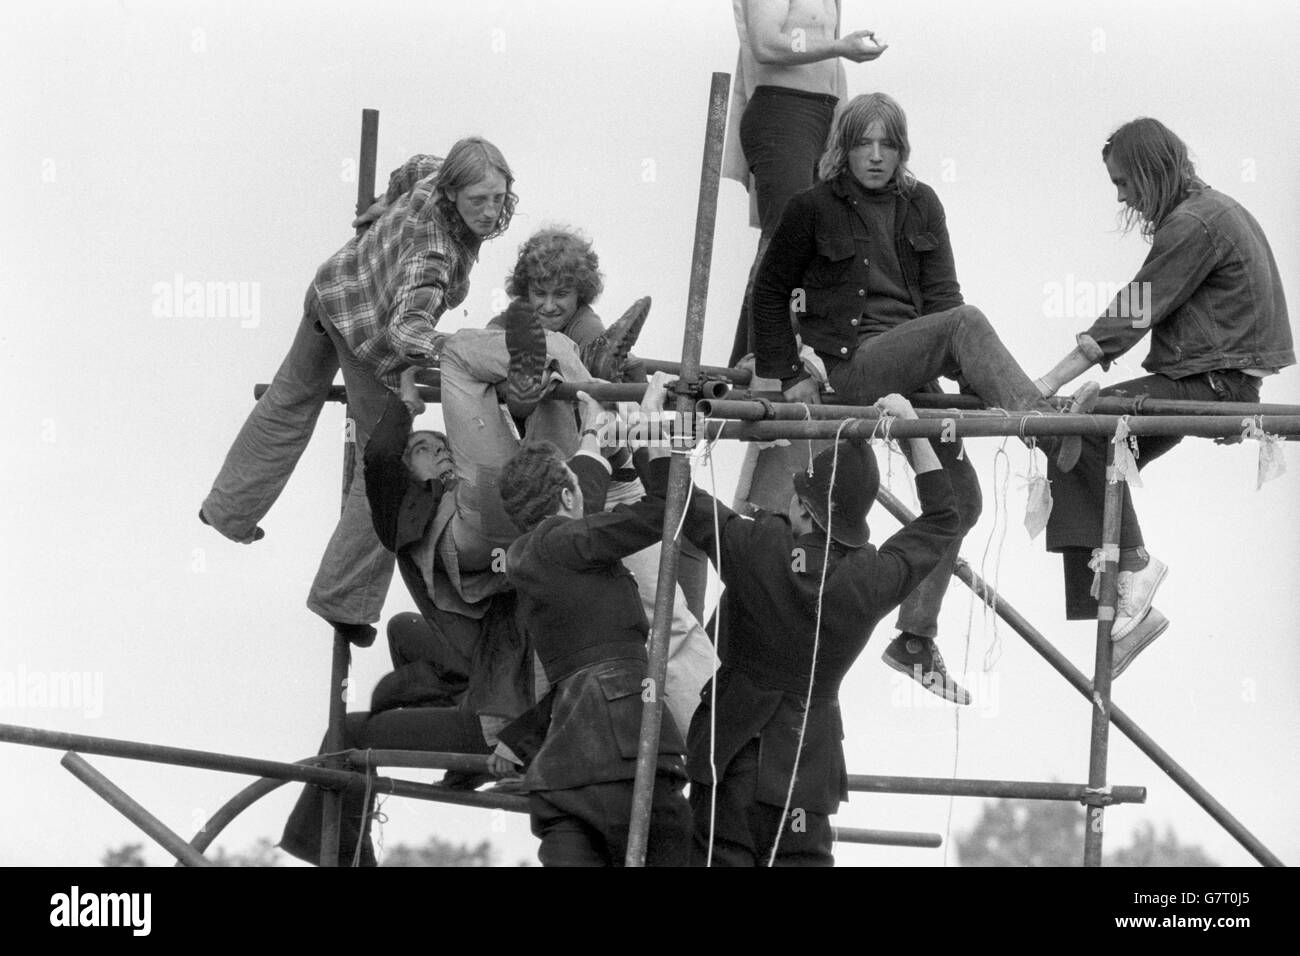 Free Pop Festival fans clamber up scaffolding poles in their bid to evade the arm of the law at Windsor Great Park after 600 police moved in to break up the event which got underway last weekend. Policemen's uniforms and fans clothes were torn in some scuffles. Stock Photo